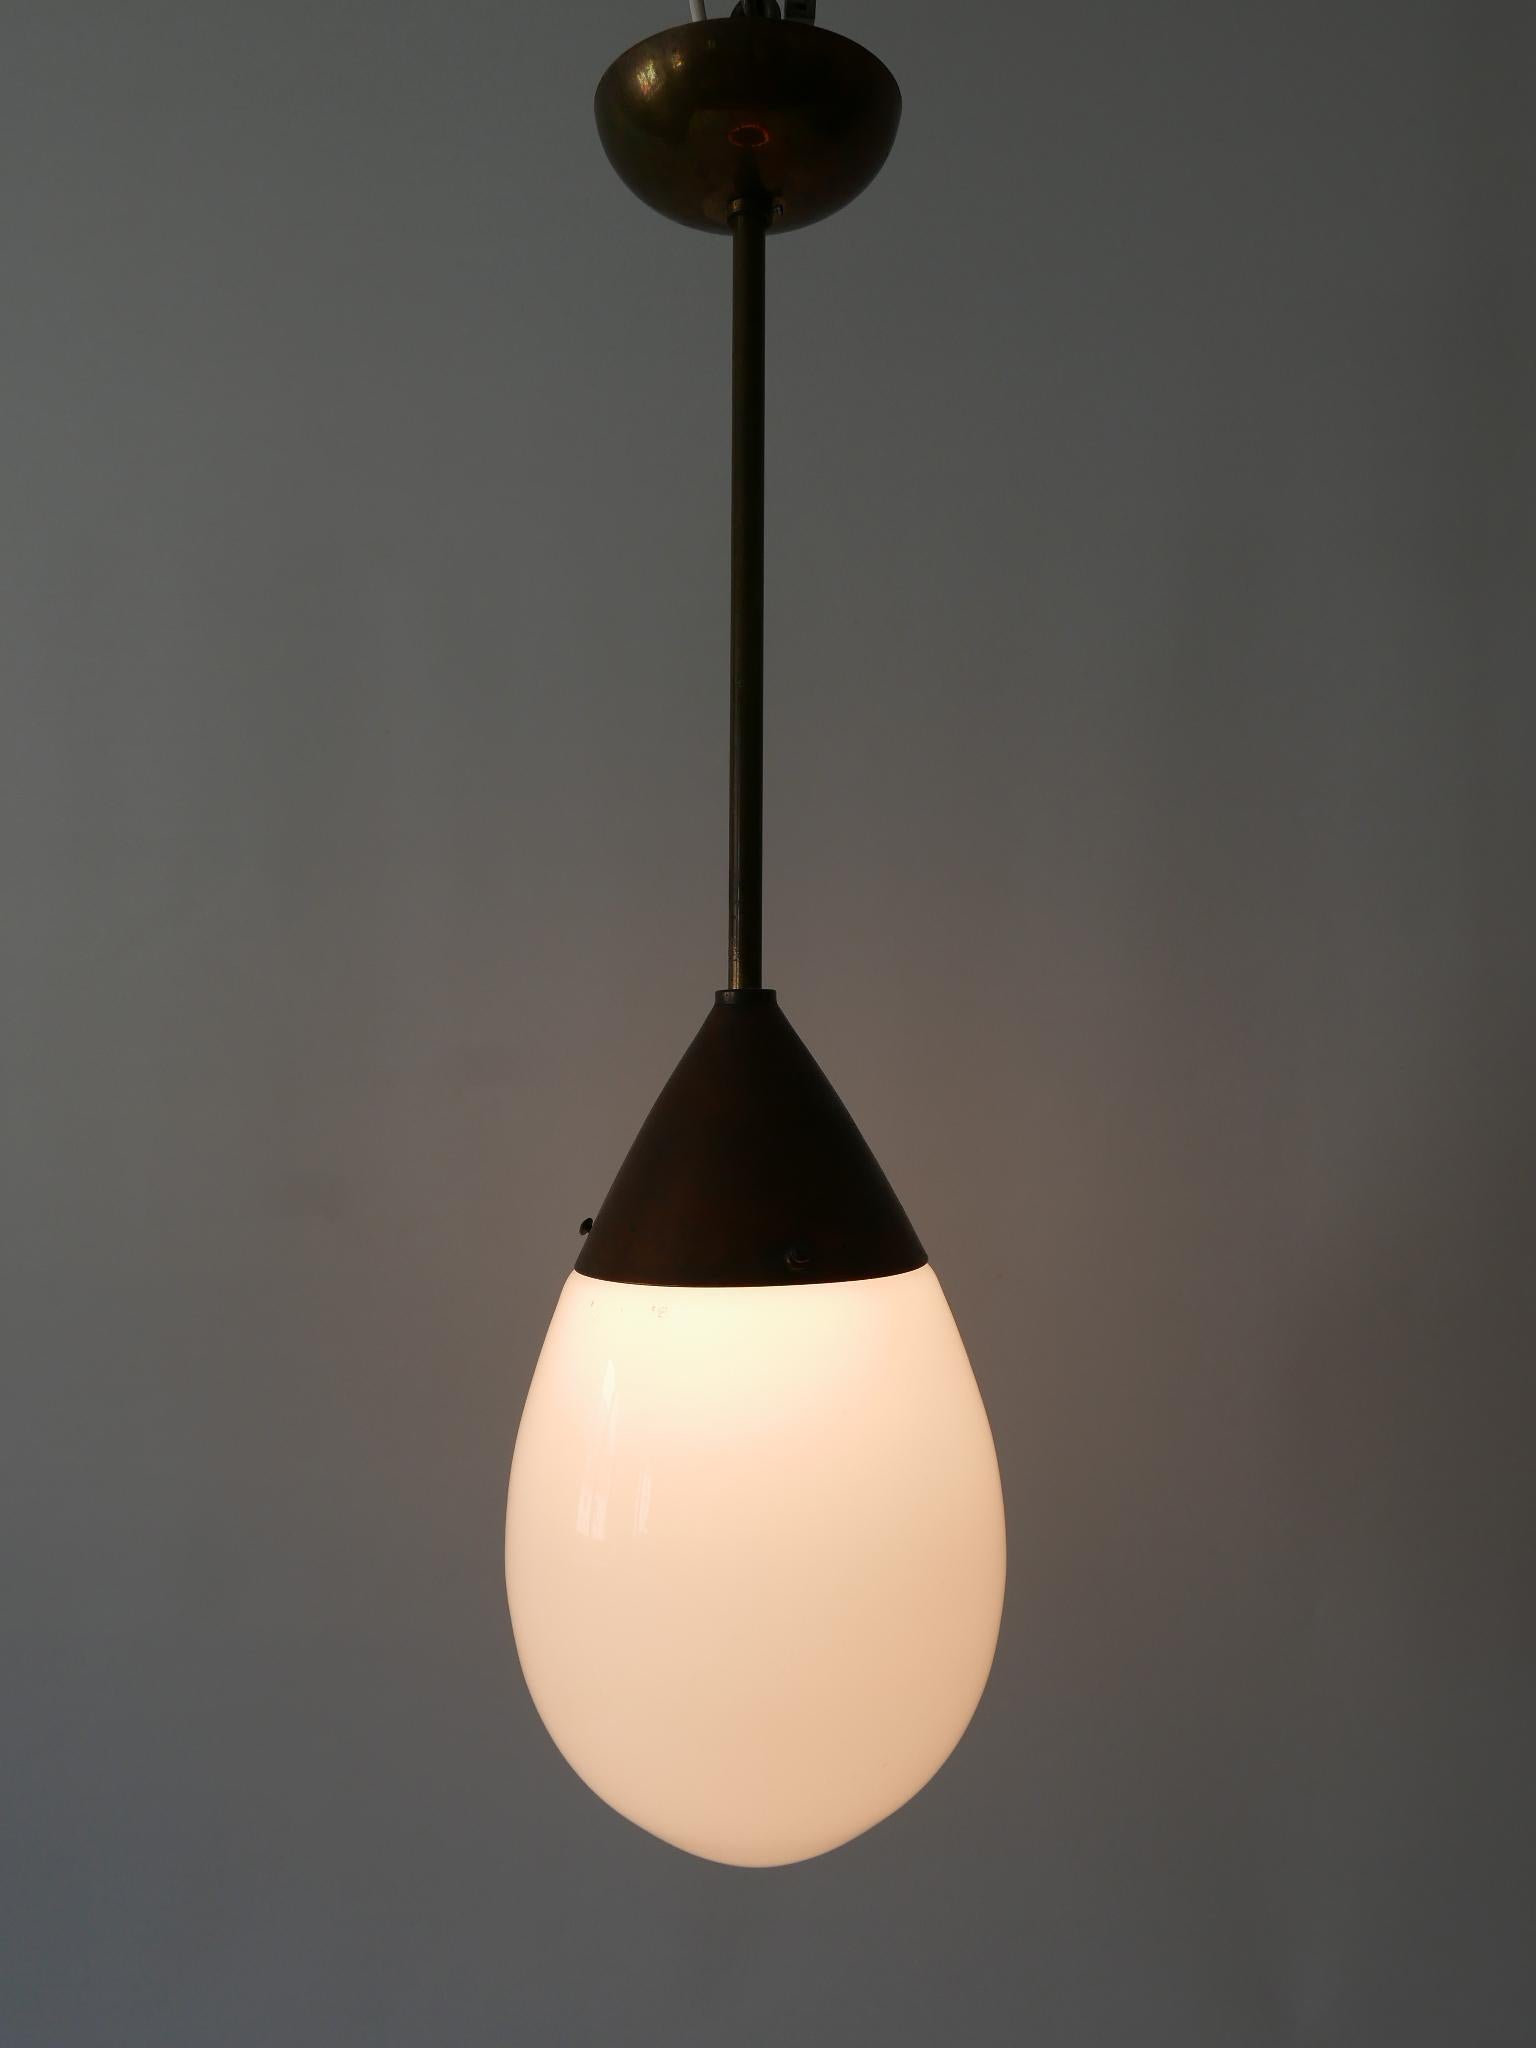 Opaline Glass Exceptional Bauhaus Pendant Lamp or Hanging Light Drop by Siemens 1920s, Germany For Sale